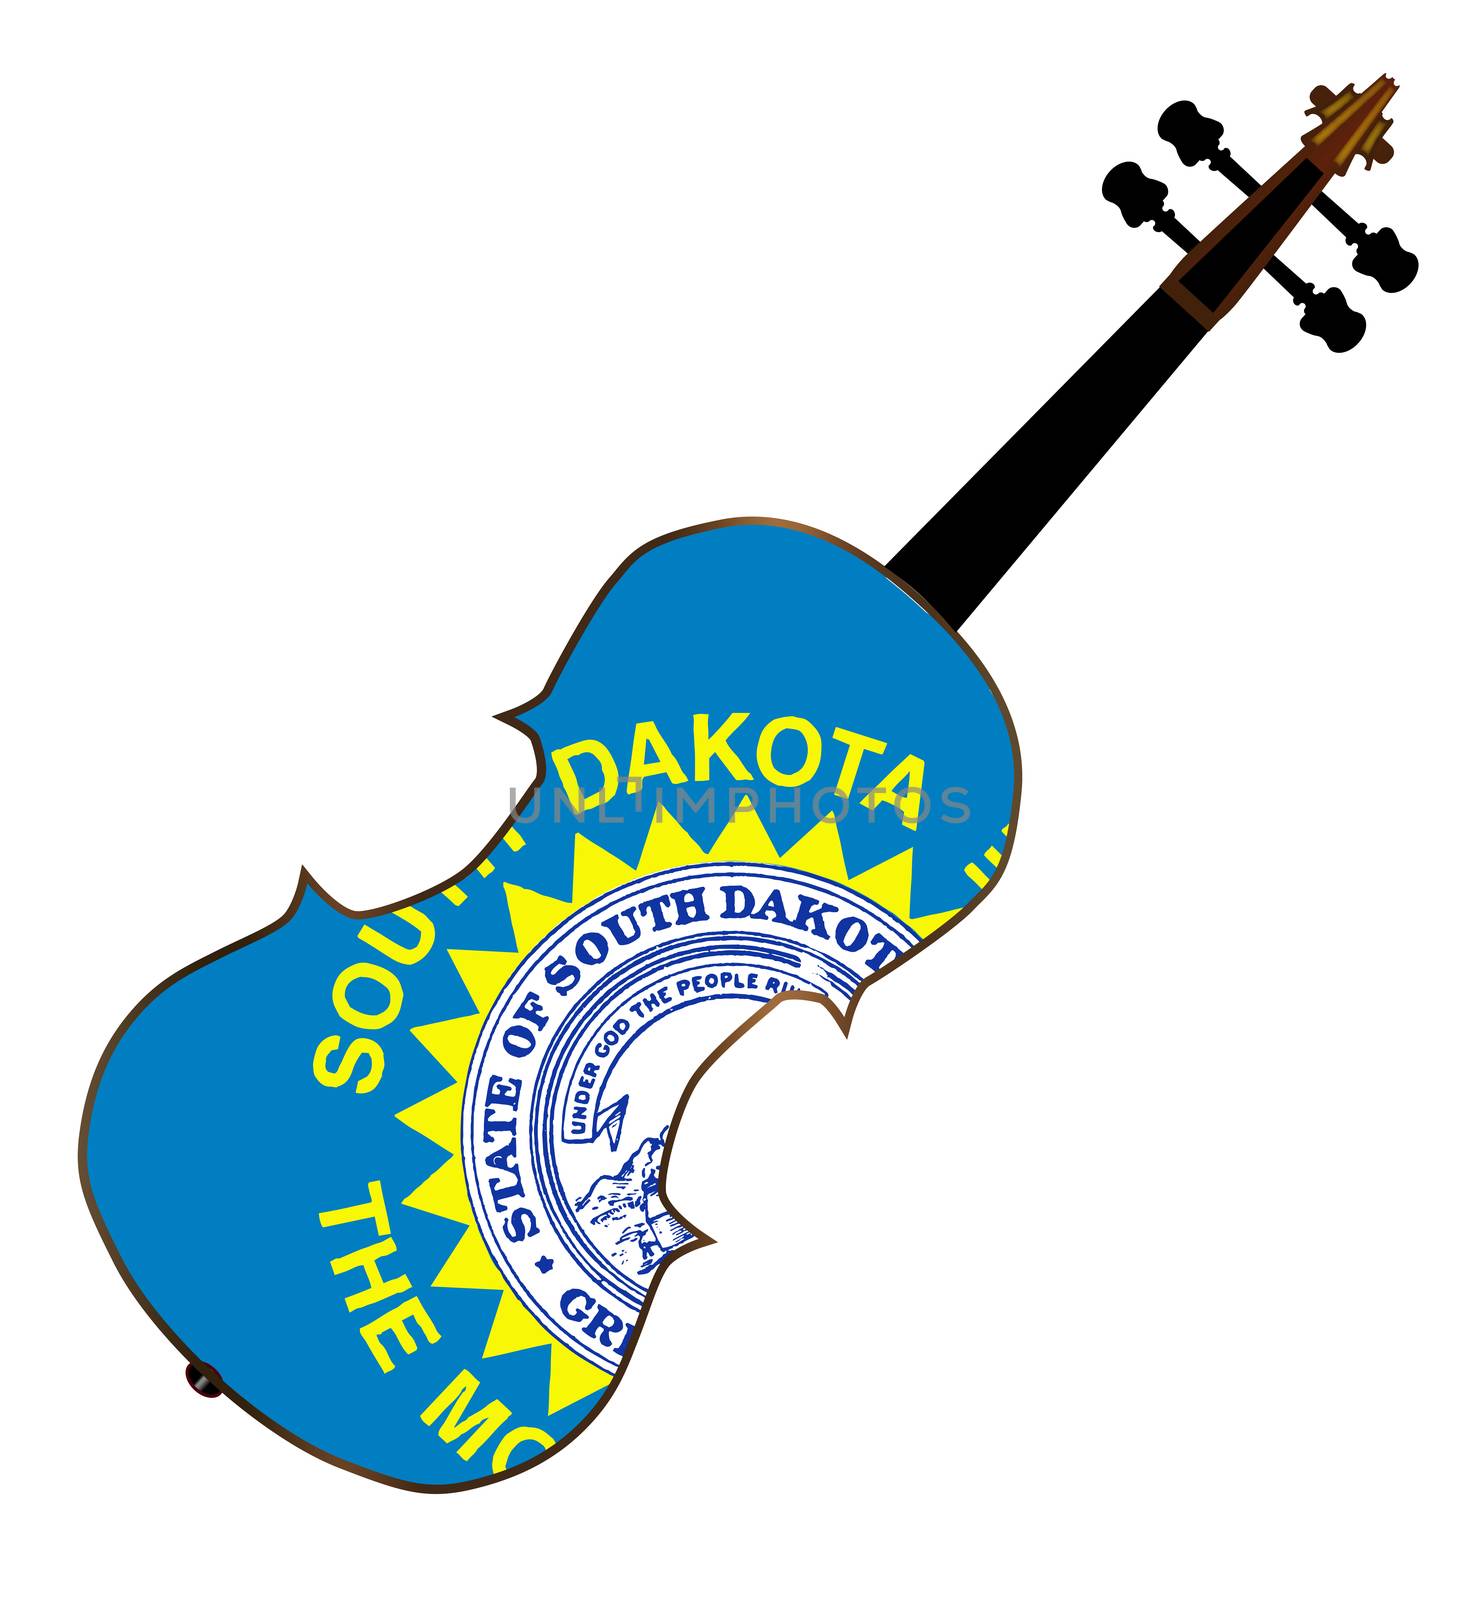 A typical violin with South Dakota state flag isolated over a white background